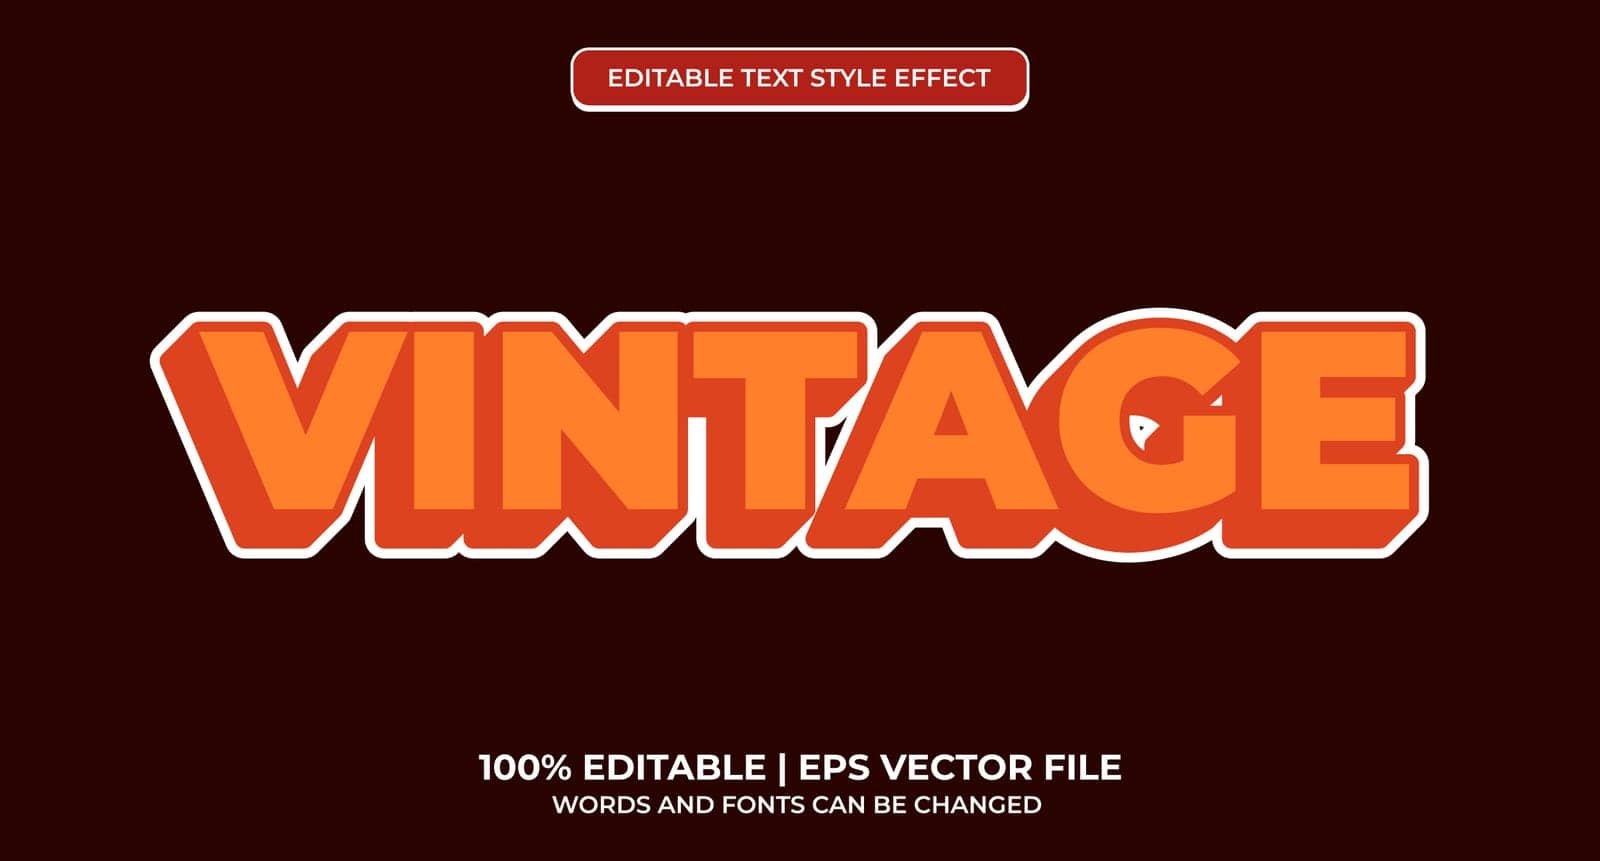 Retro, vintage text effect, editable 70s and 80s text style. Editable text effect